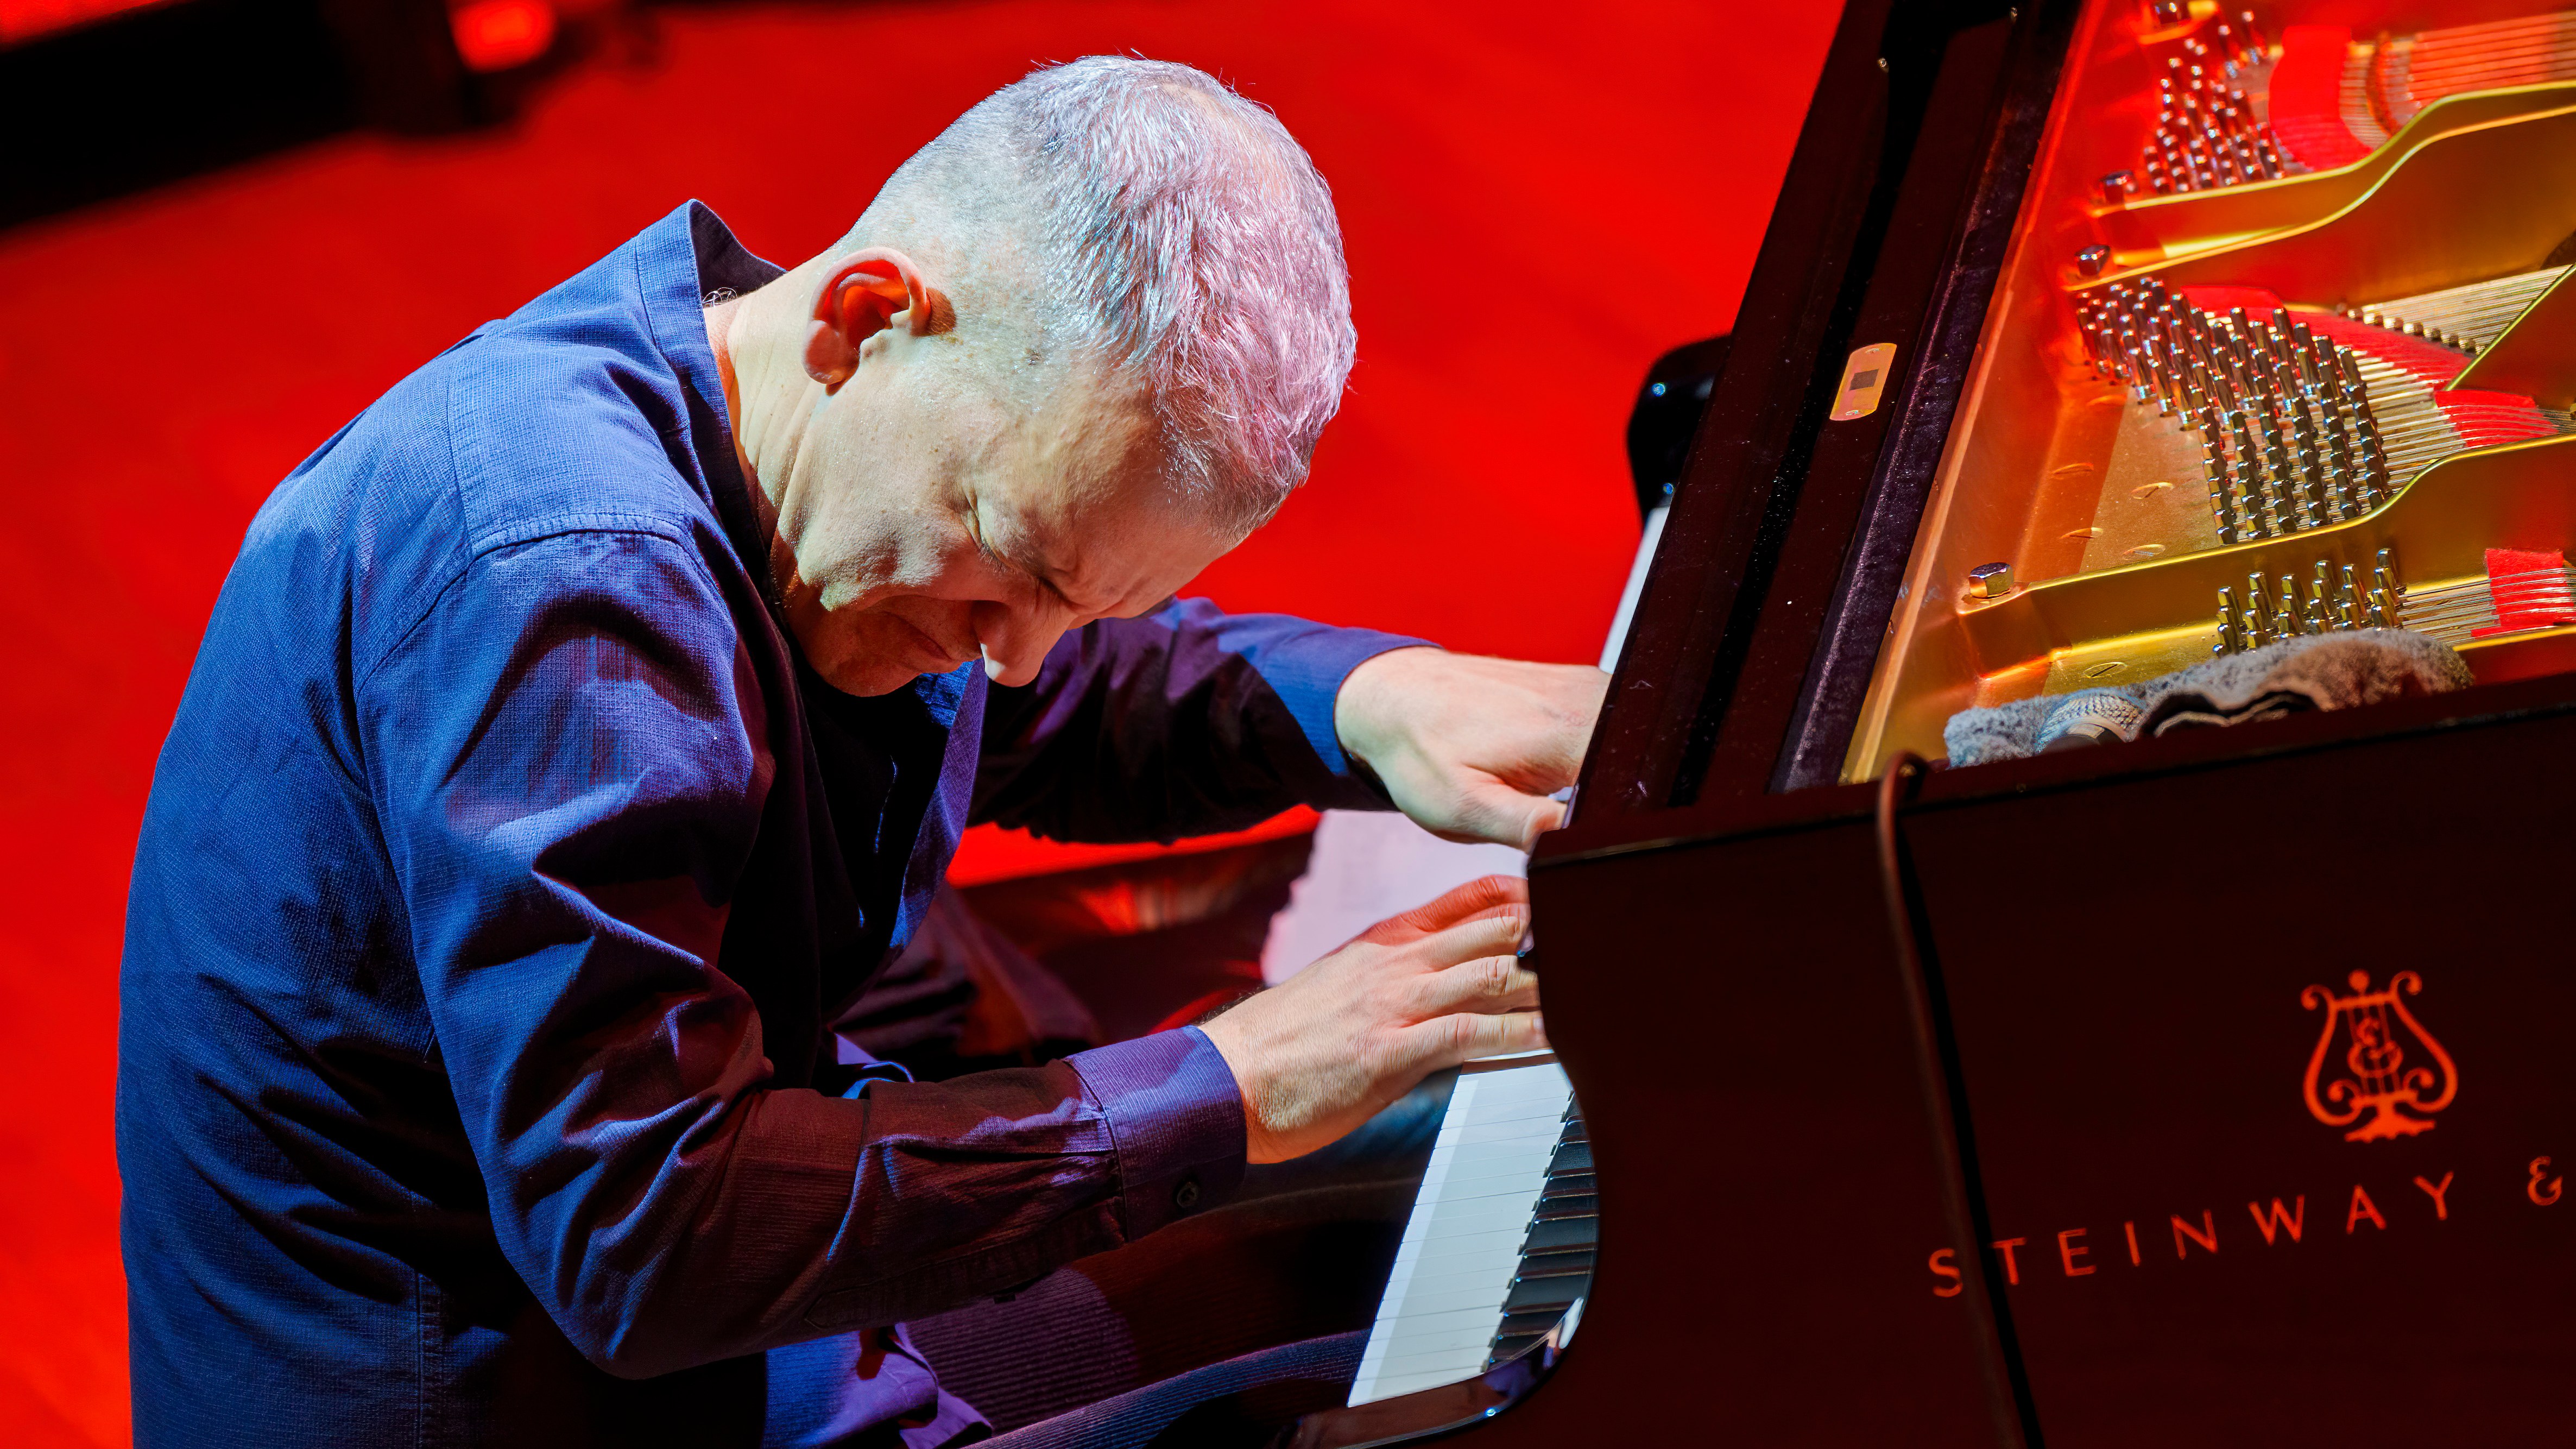 The jazz pianist Brad Mehldau played John Coltrane’s Satellite among a set of less-expected songs